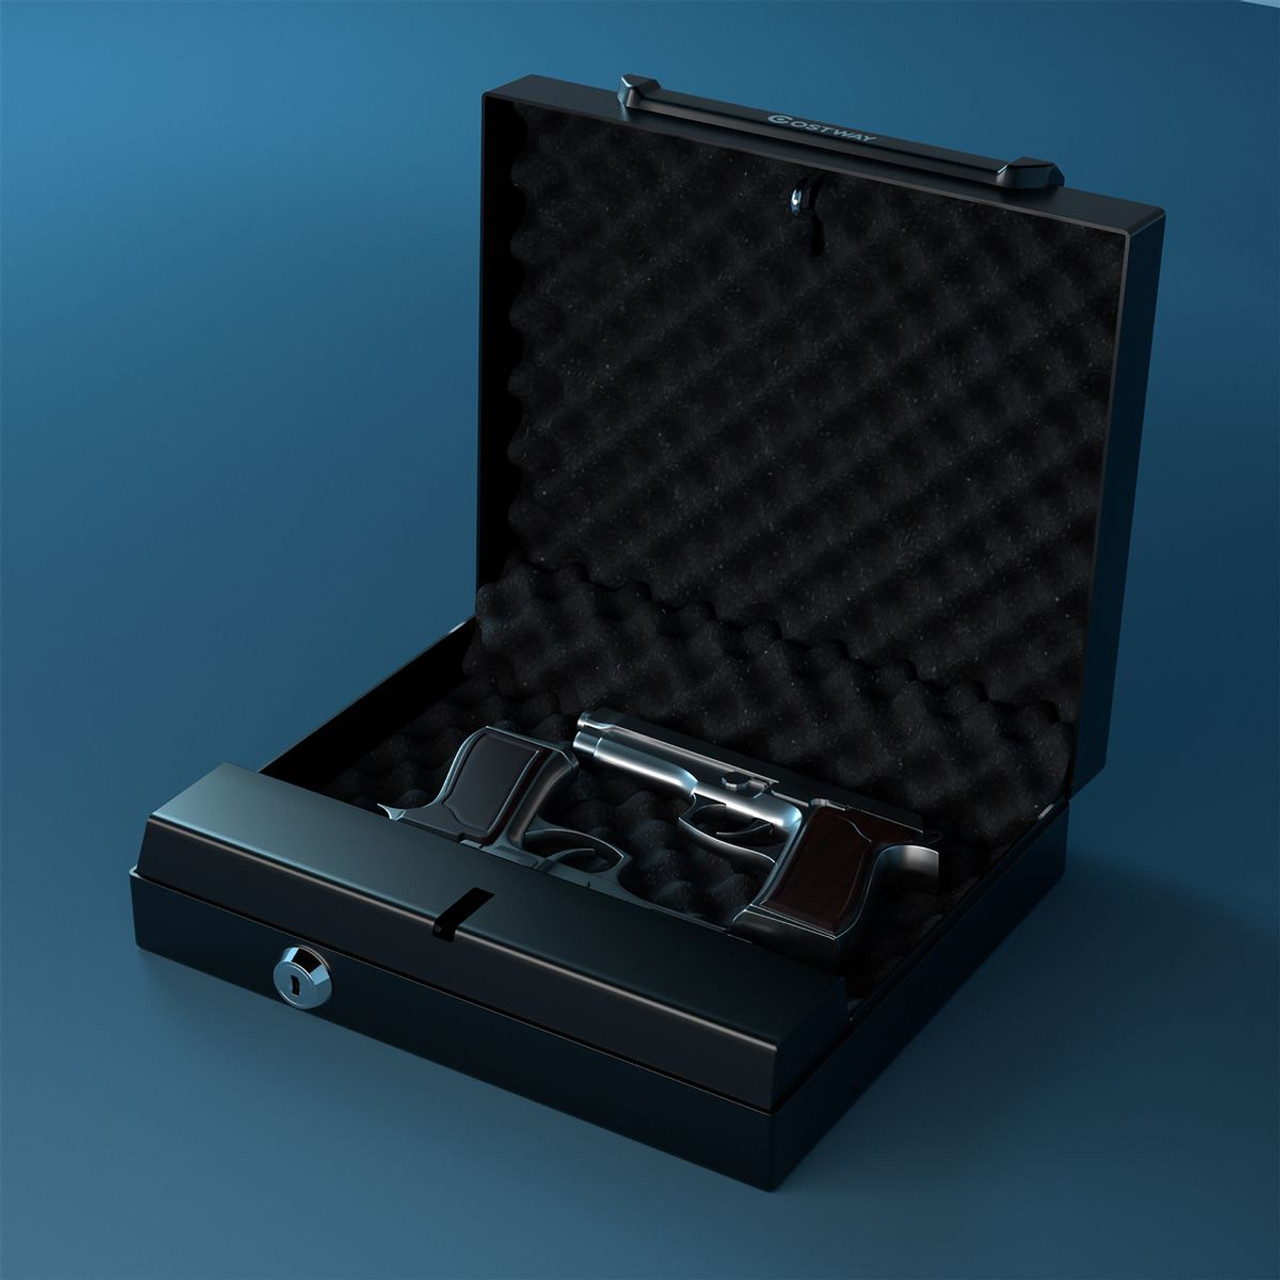 Quick-Access Key Firearm Safe for Enhanced Gun Security product image